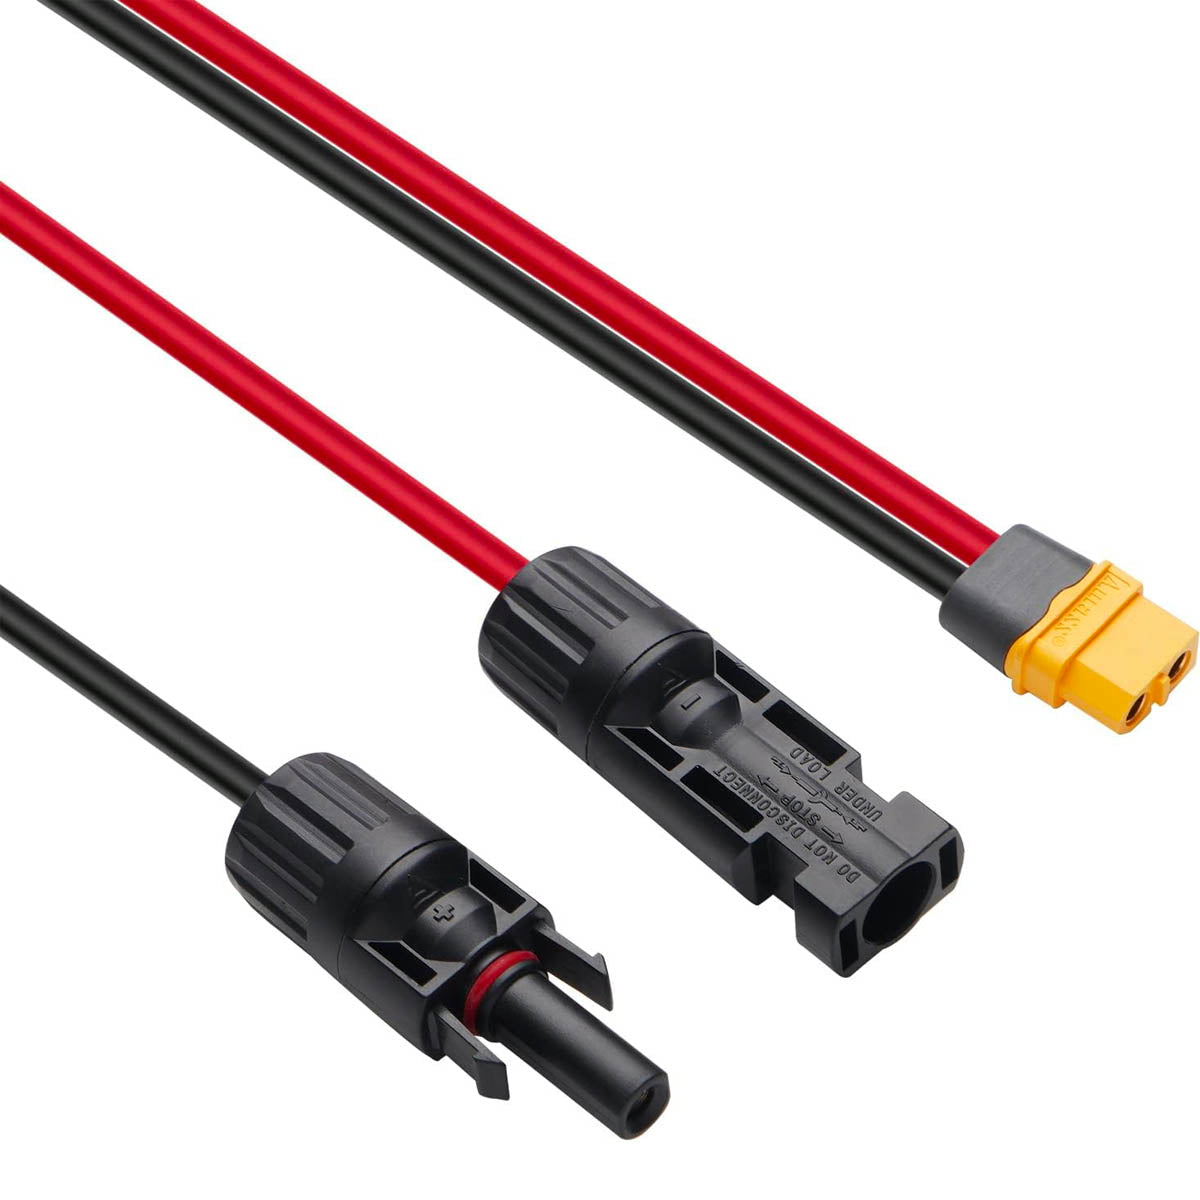 ALLPOWERS Solar PV Interconnect Cable with XT60 Connector 1.5m 4.9ft